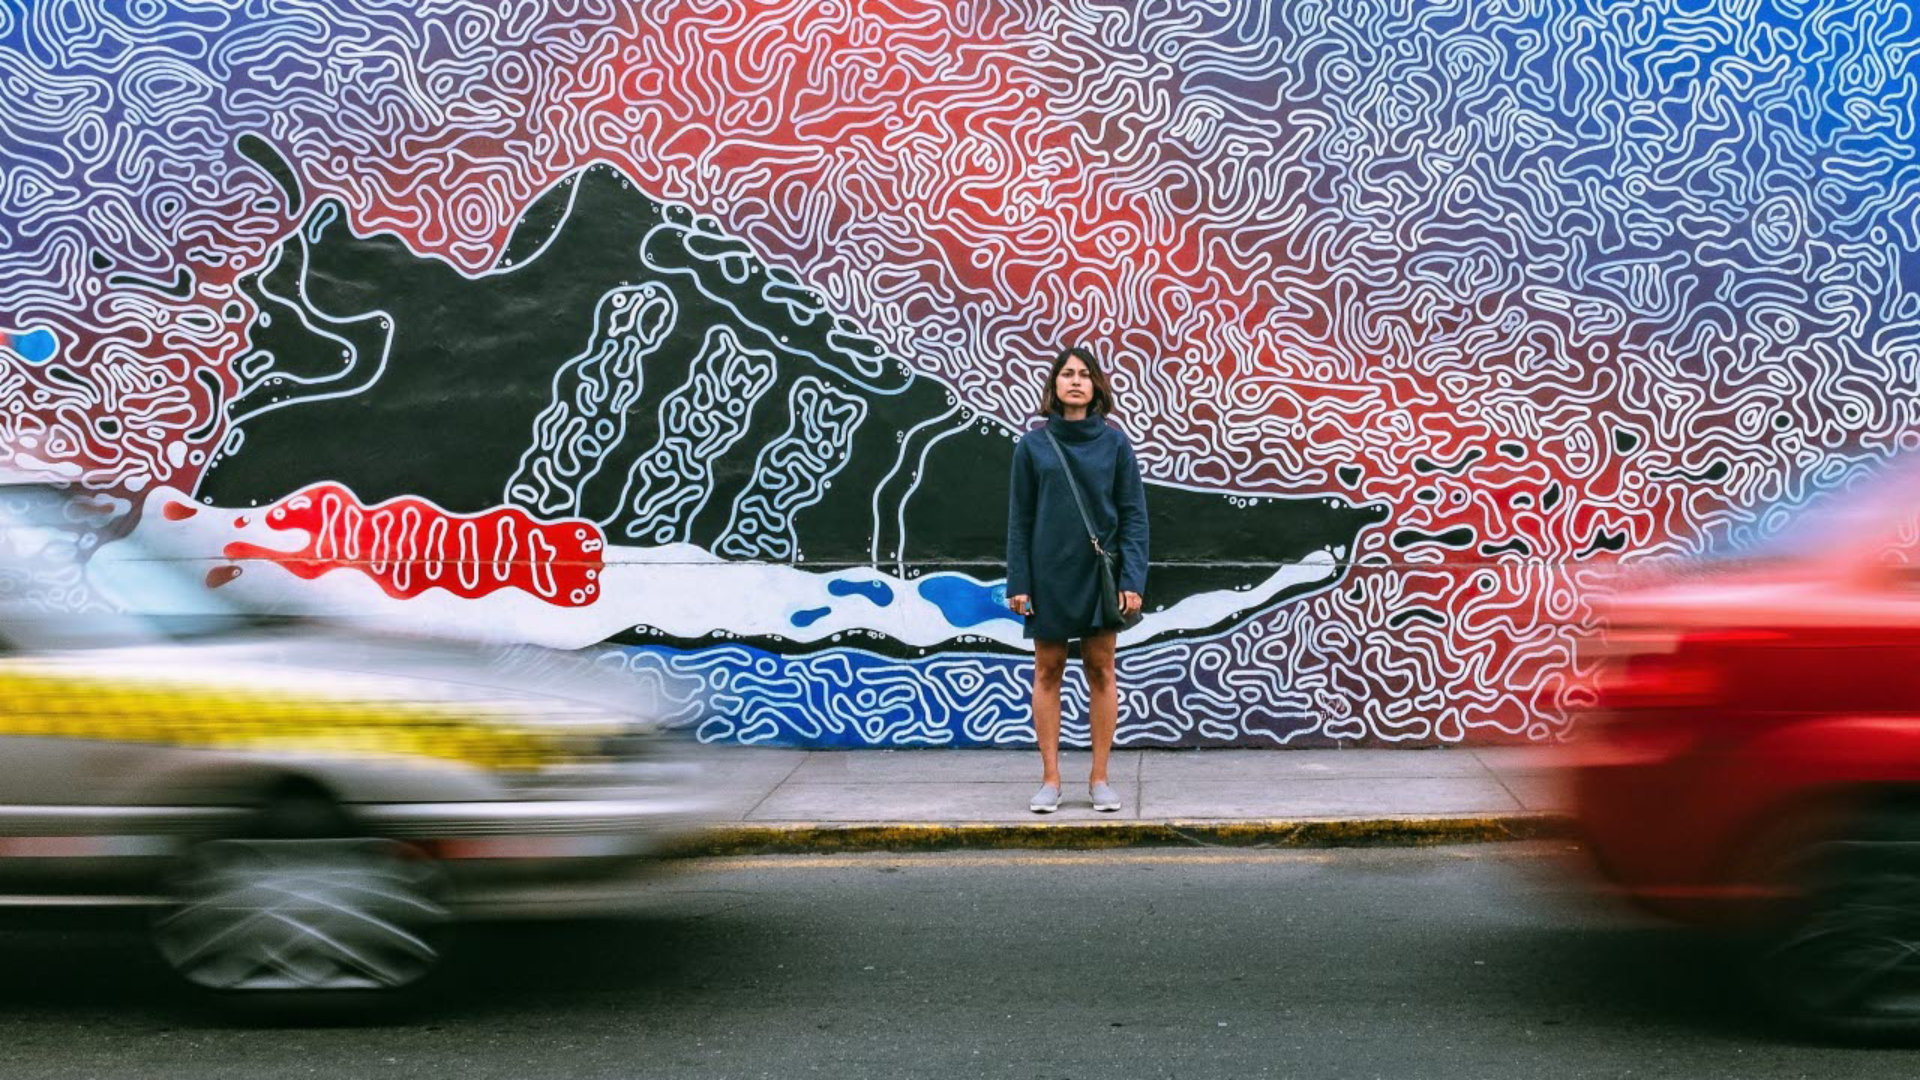 Woman standing in front of wall art of footwear whilst cars pass by